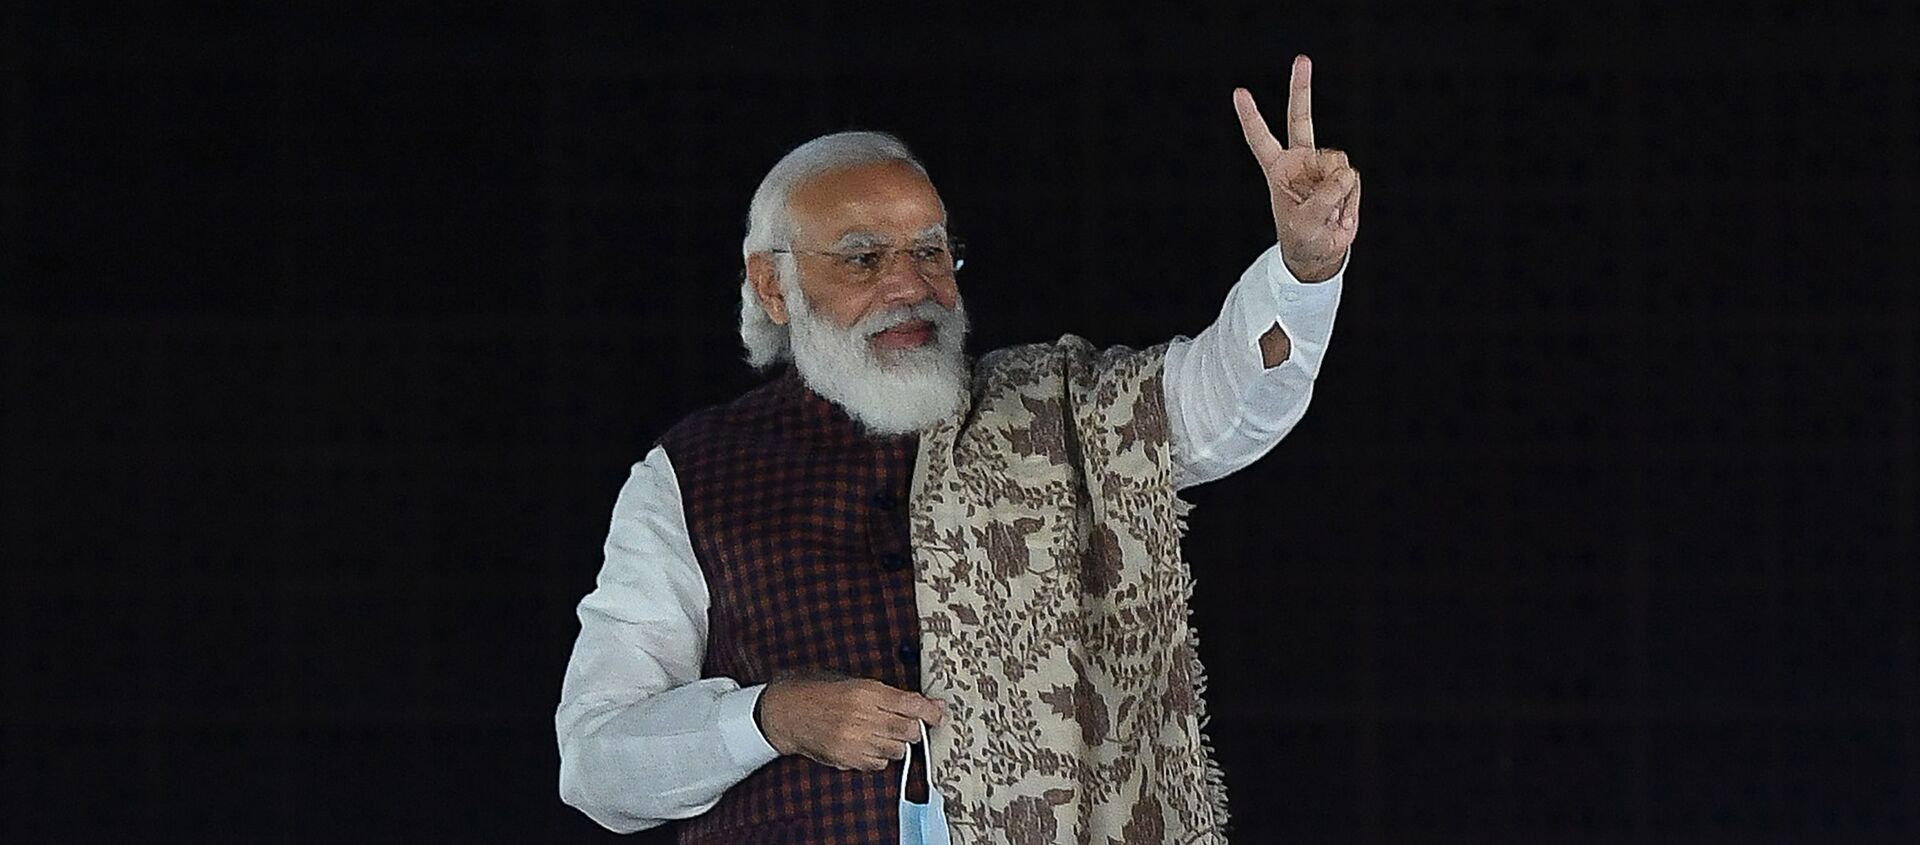 India's Prime Minister Narendra Modi gestures during the celebrations after the victory in Bihar assembly election and by-election in other states at the Bharatiya Janata Party (BJP) headquarters in New Delhi on November 11, 2020 - Sputnik International, 1920, 20.11.2020